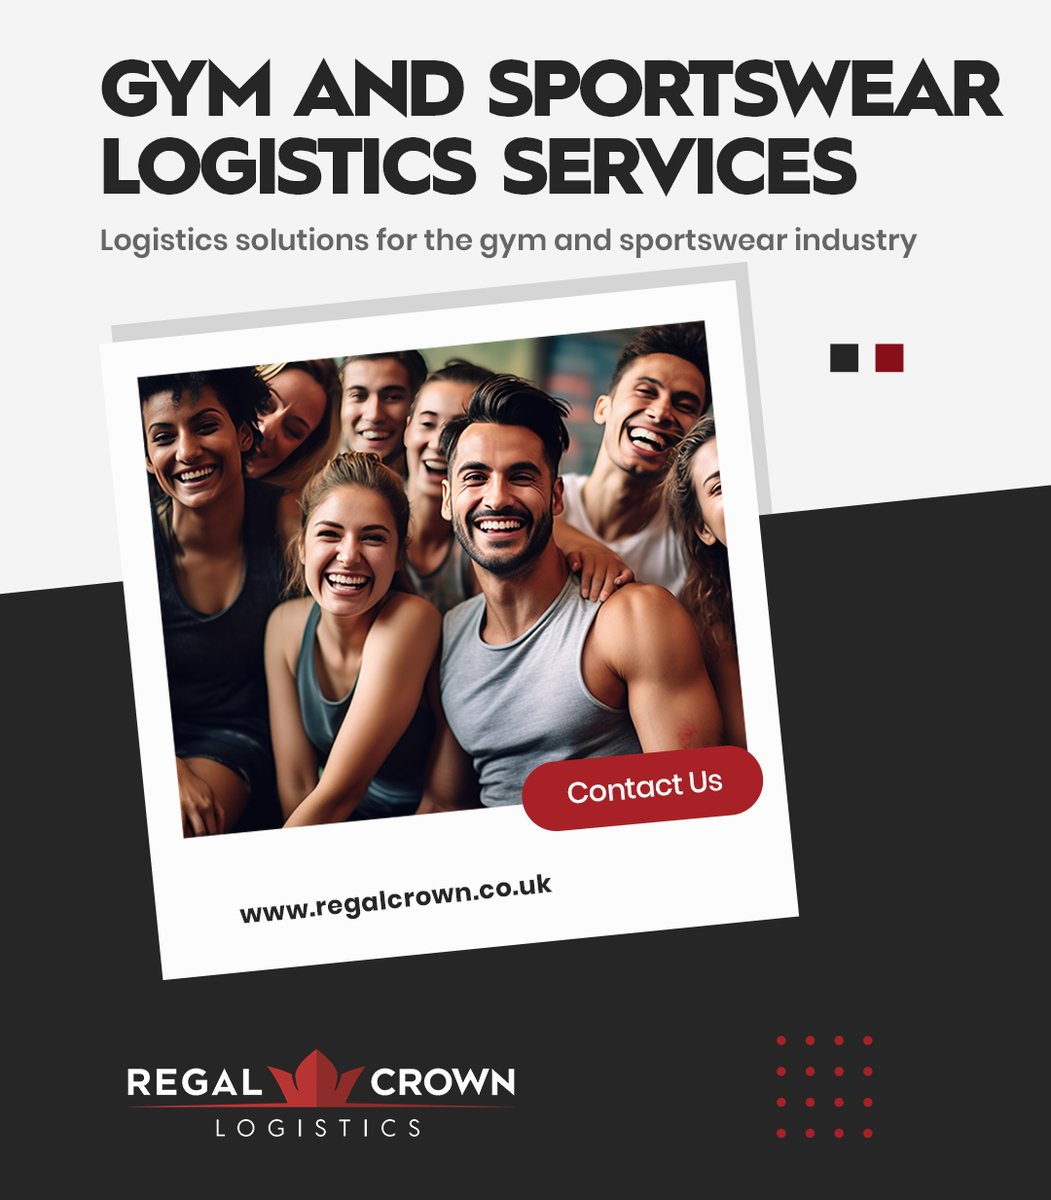 Regal Crown Logistics - Your Global Supply Chain Specialists.
regalcrown.co.uk
#oceanfreight #airfreight #roadfreight #seafreight #RegalCrown